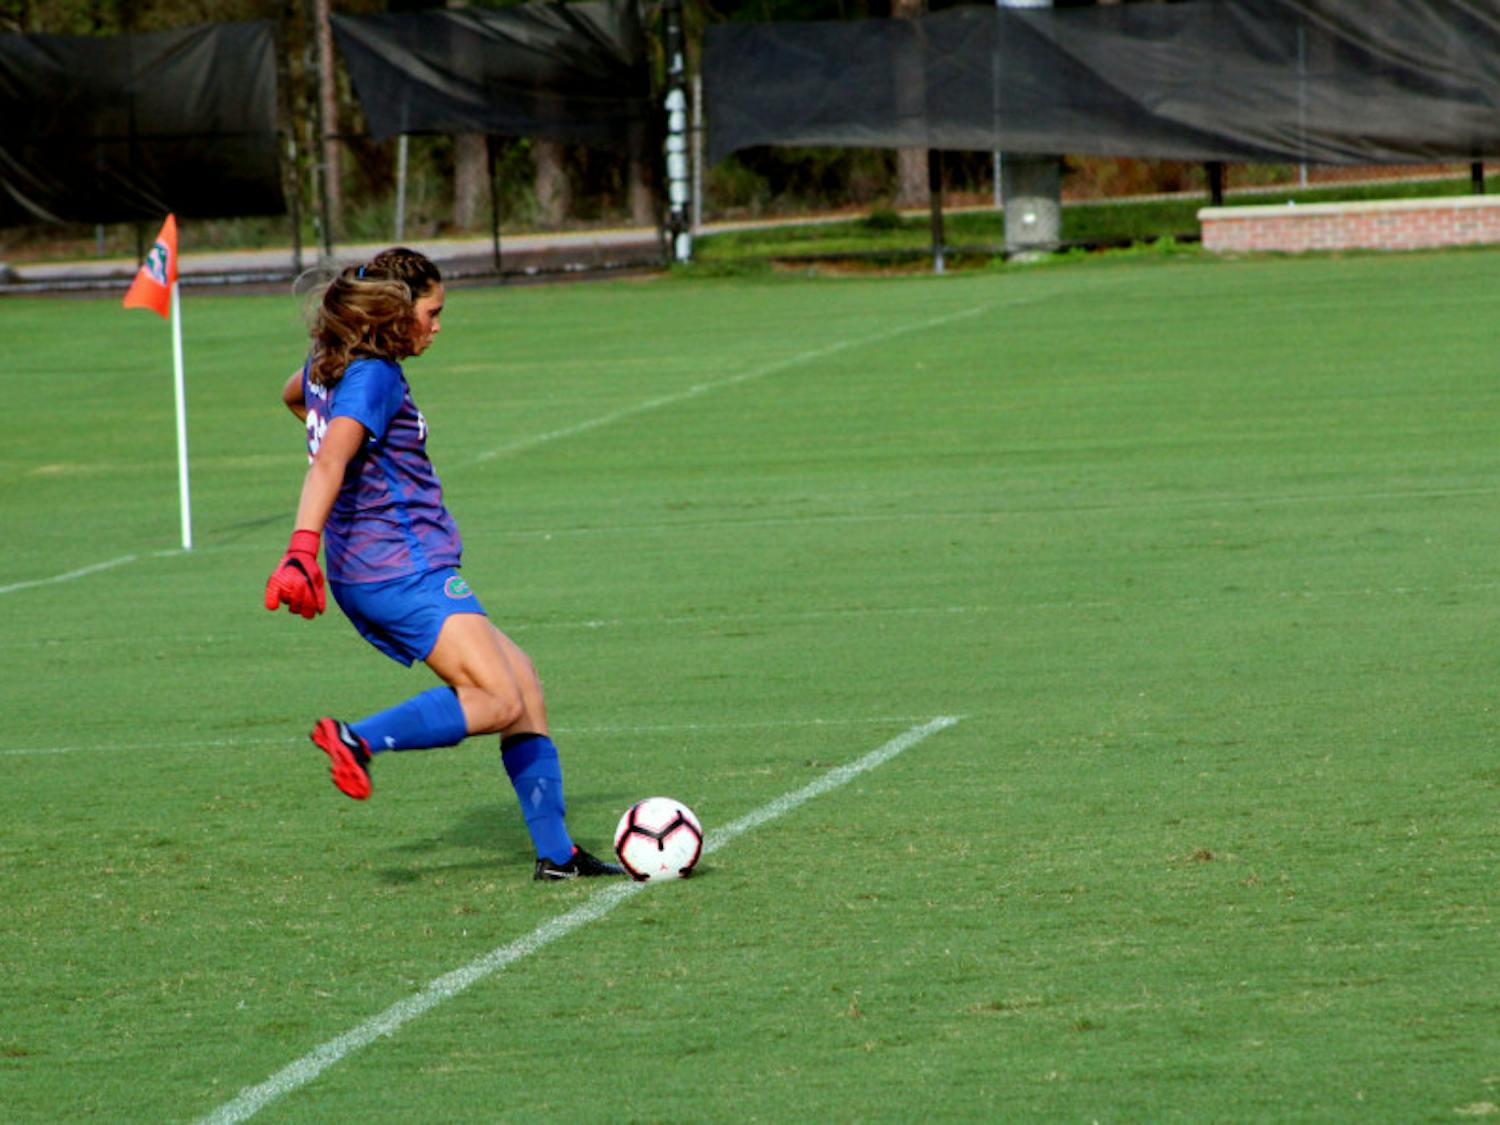 Florida goalkeeper Kaylan Marckese saved three shots in the first half of UF’s 0-0 tie against Alabama on Sunday.